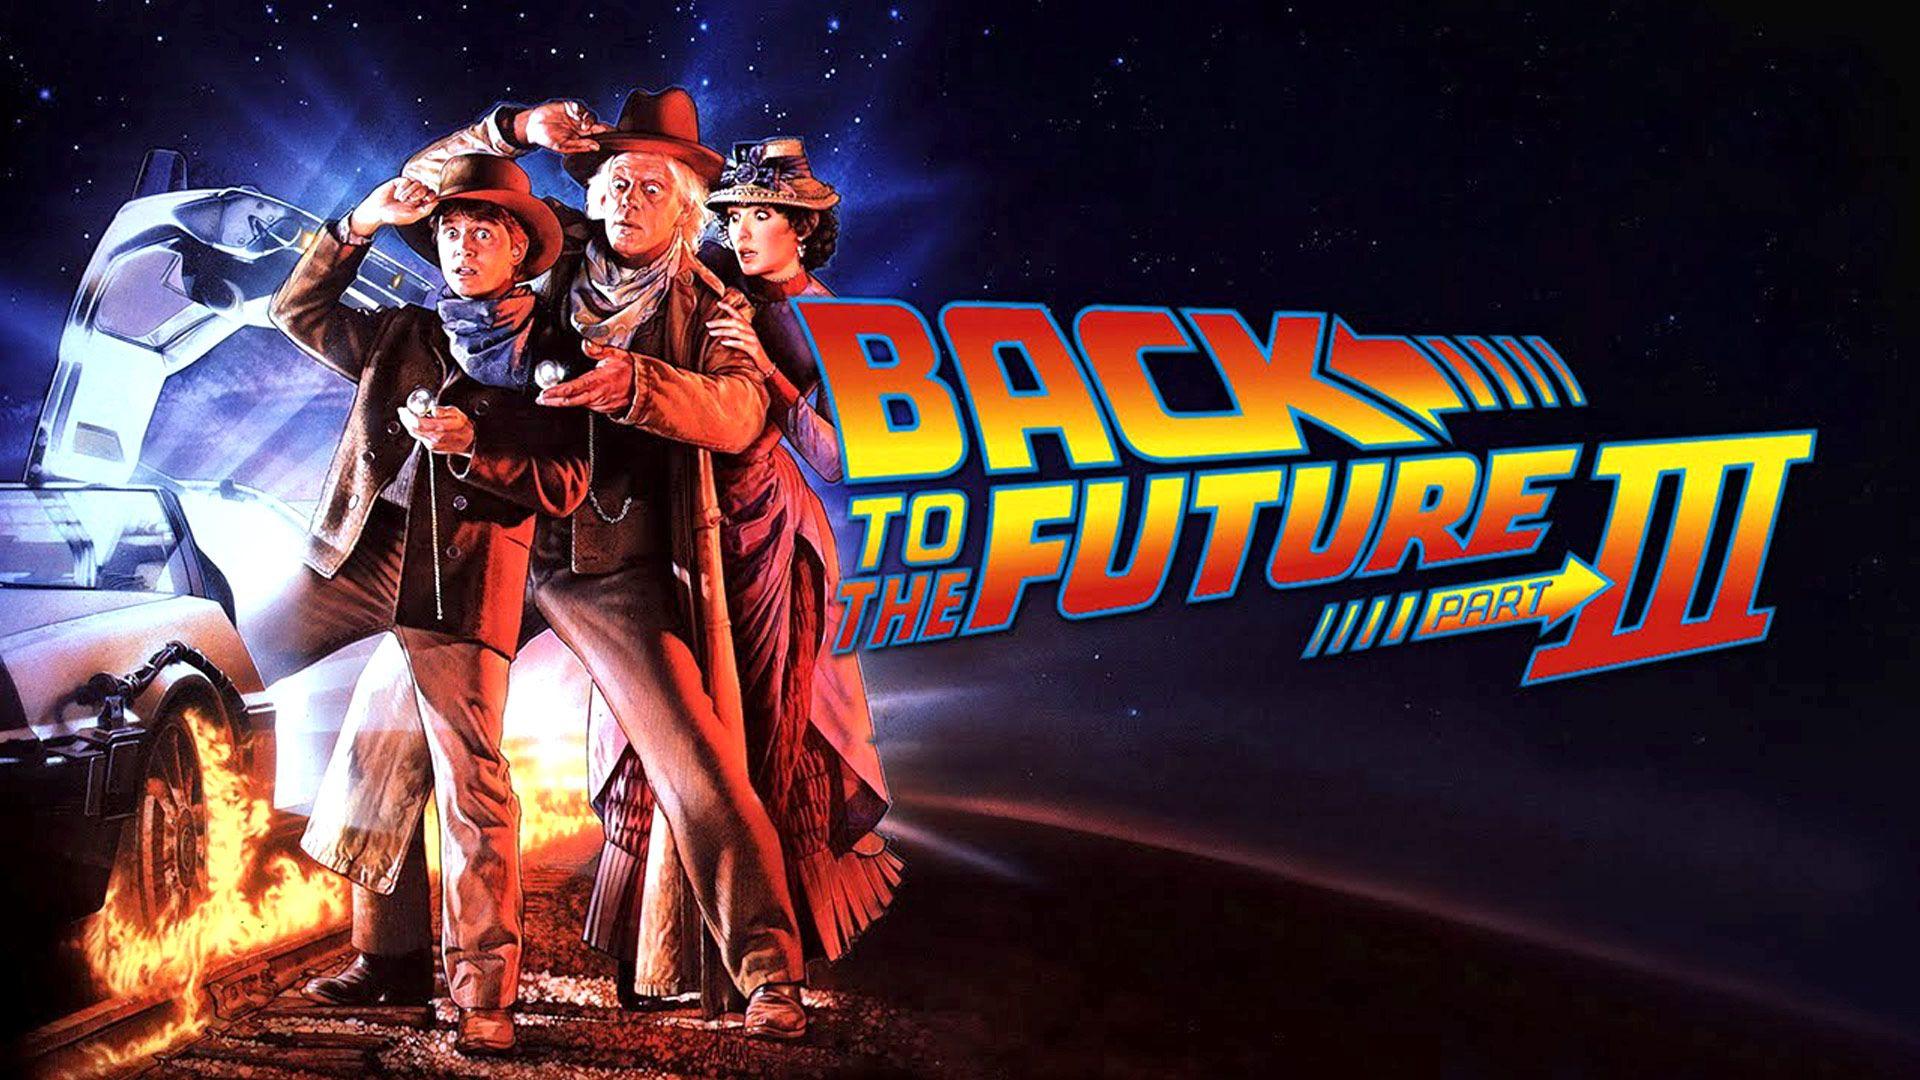 Back to the Future 2 Wallpapers - Top Free Back to the Future 2 ...